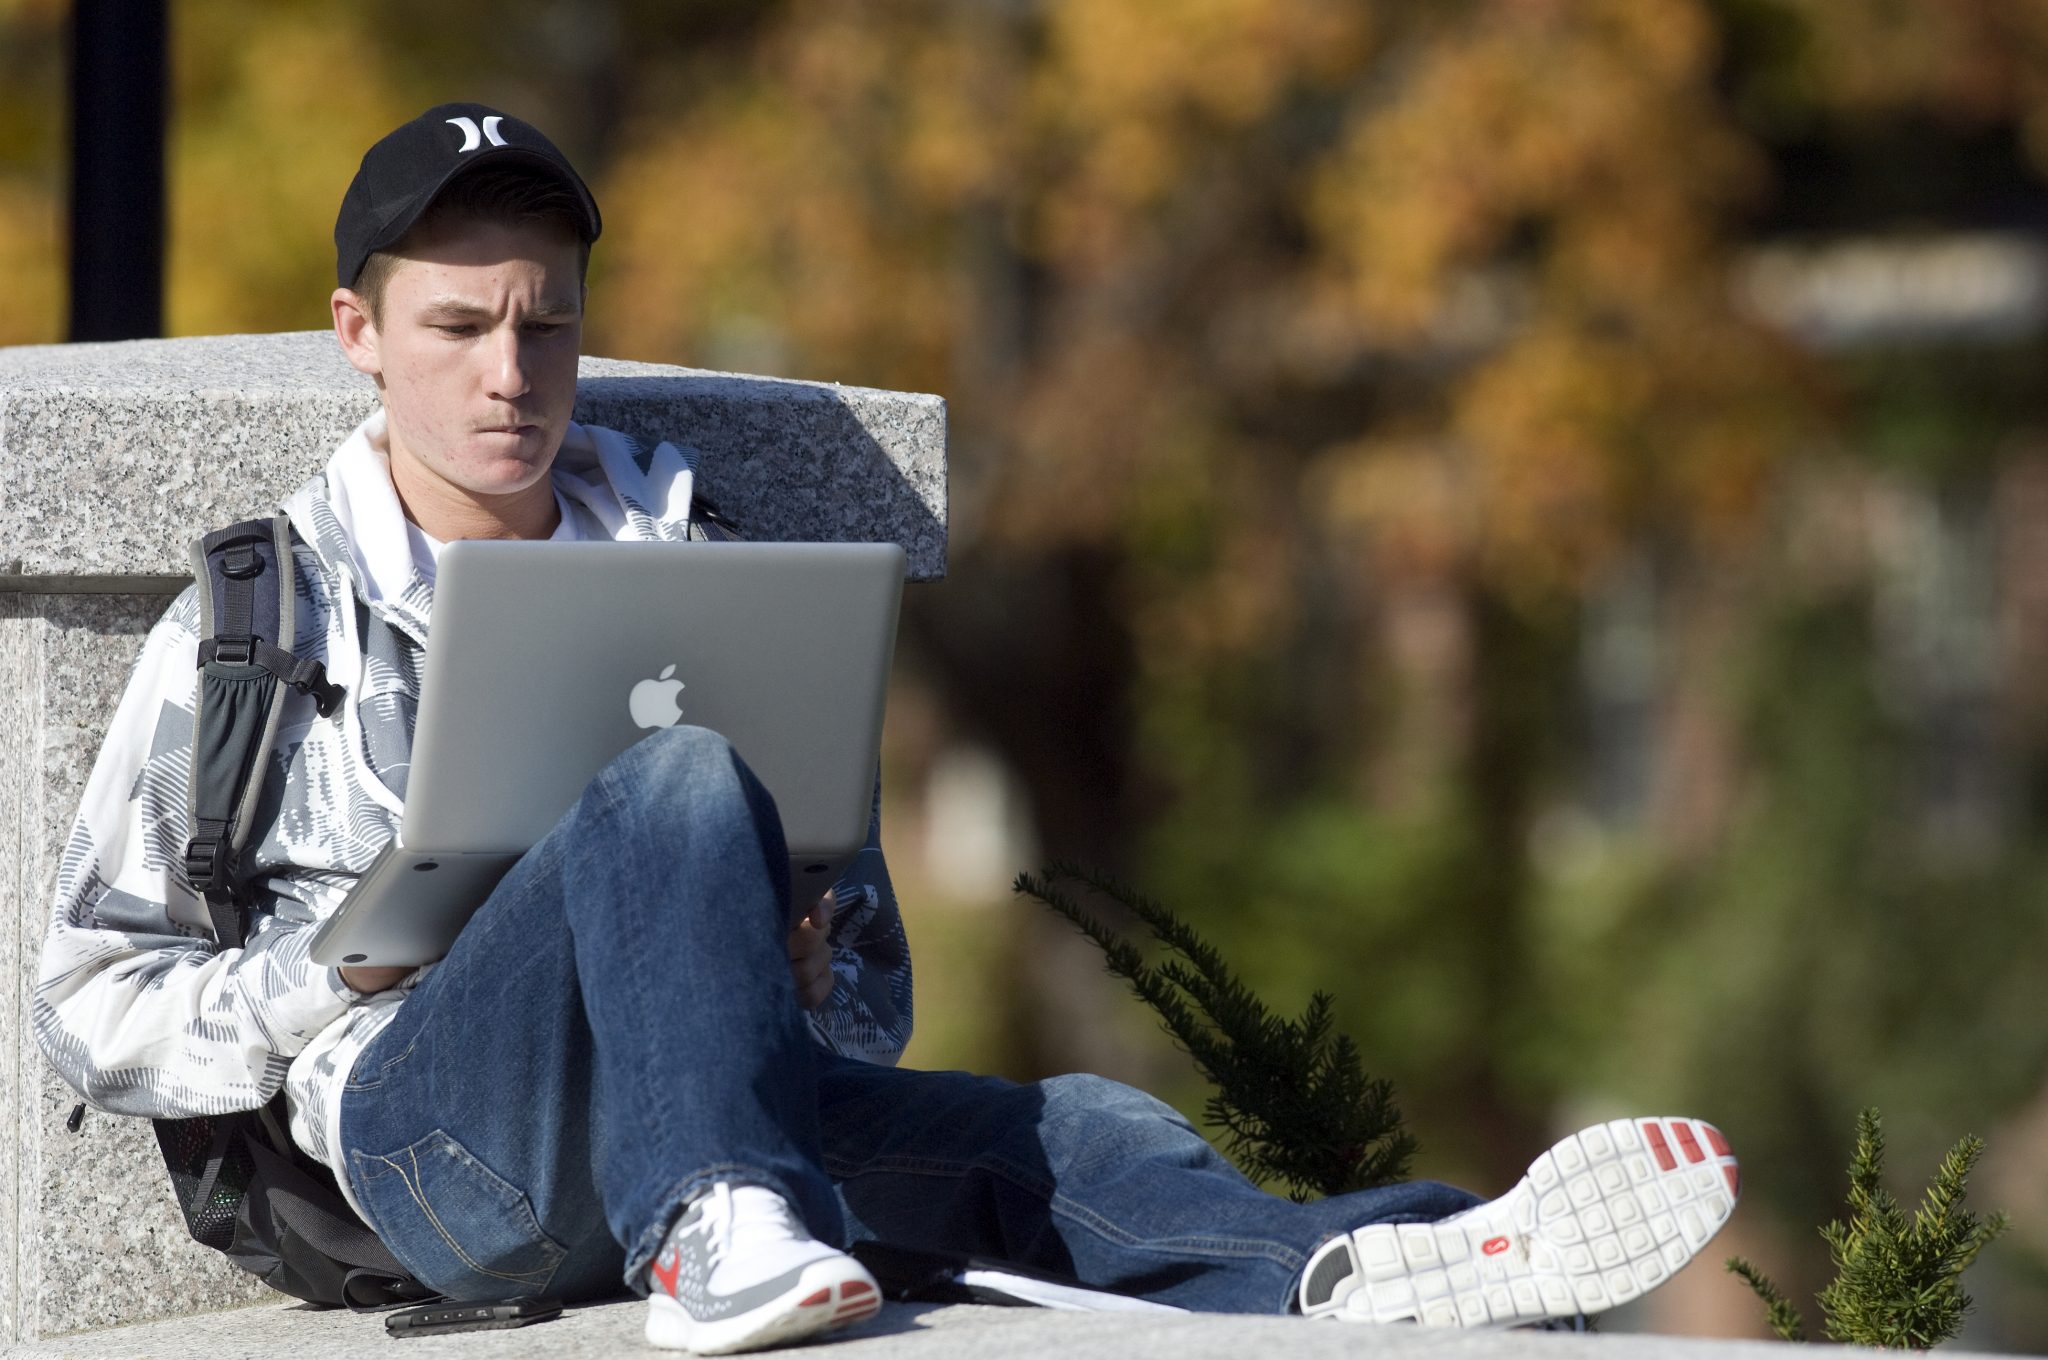 student studying on laptop outside